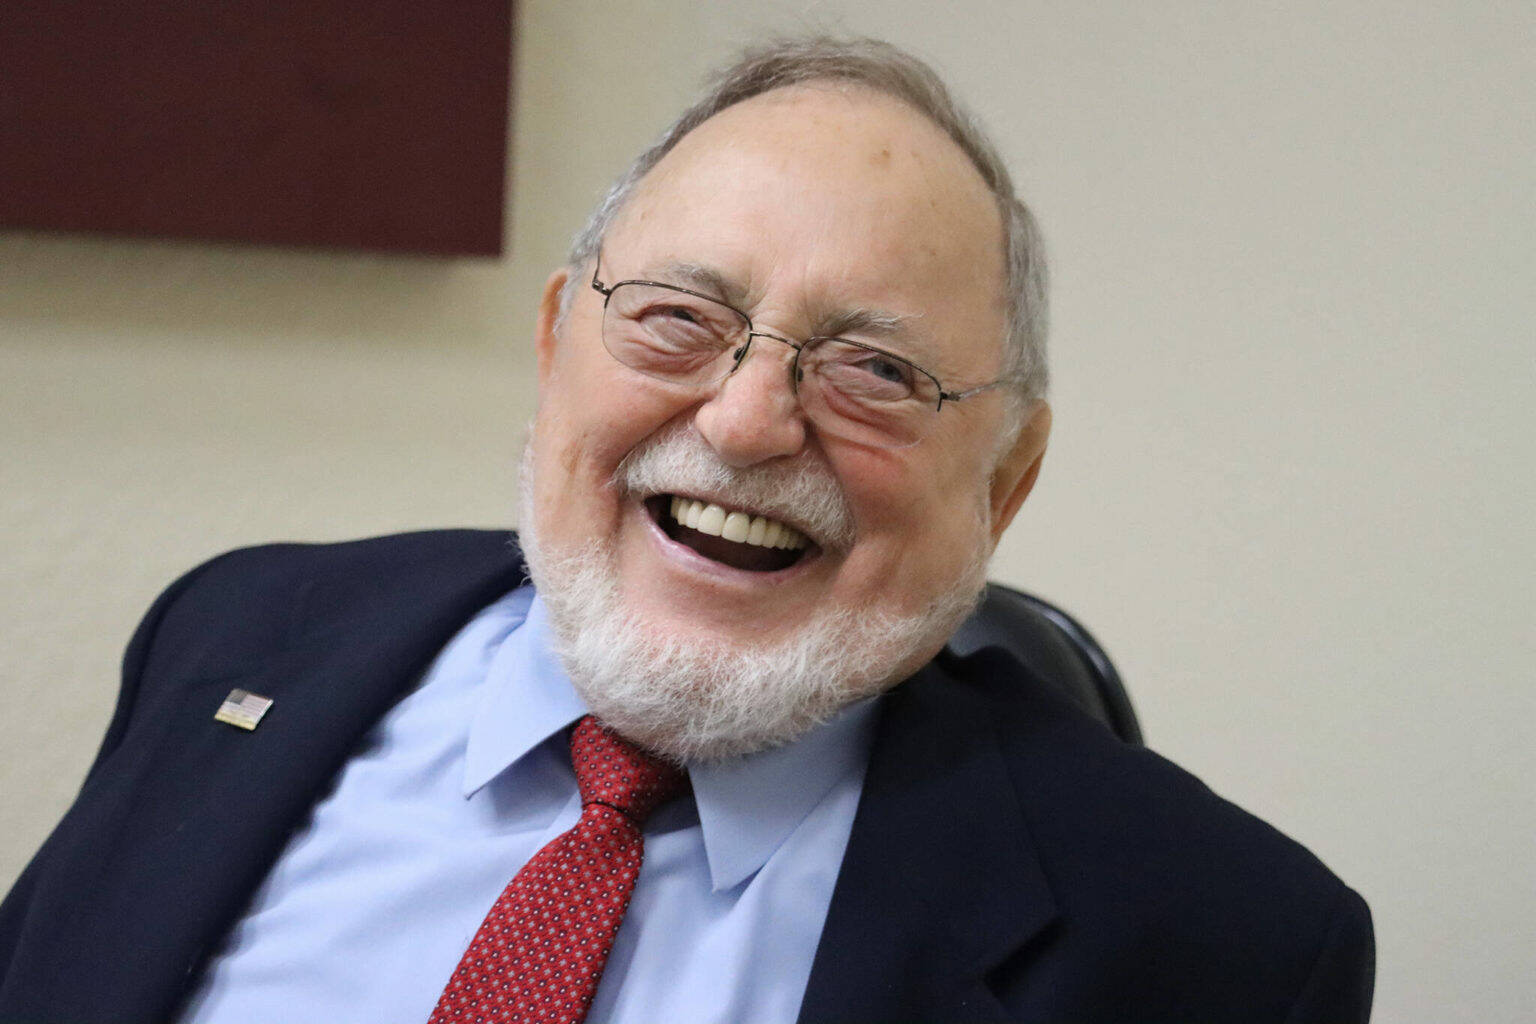 Rep. Don Young smiles during a sit-down in the Juneau Empire’s offices last June. (Ben Hohenstatt / Juneau Empire File)